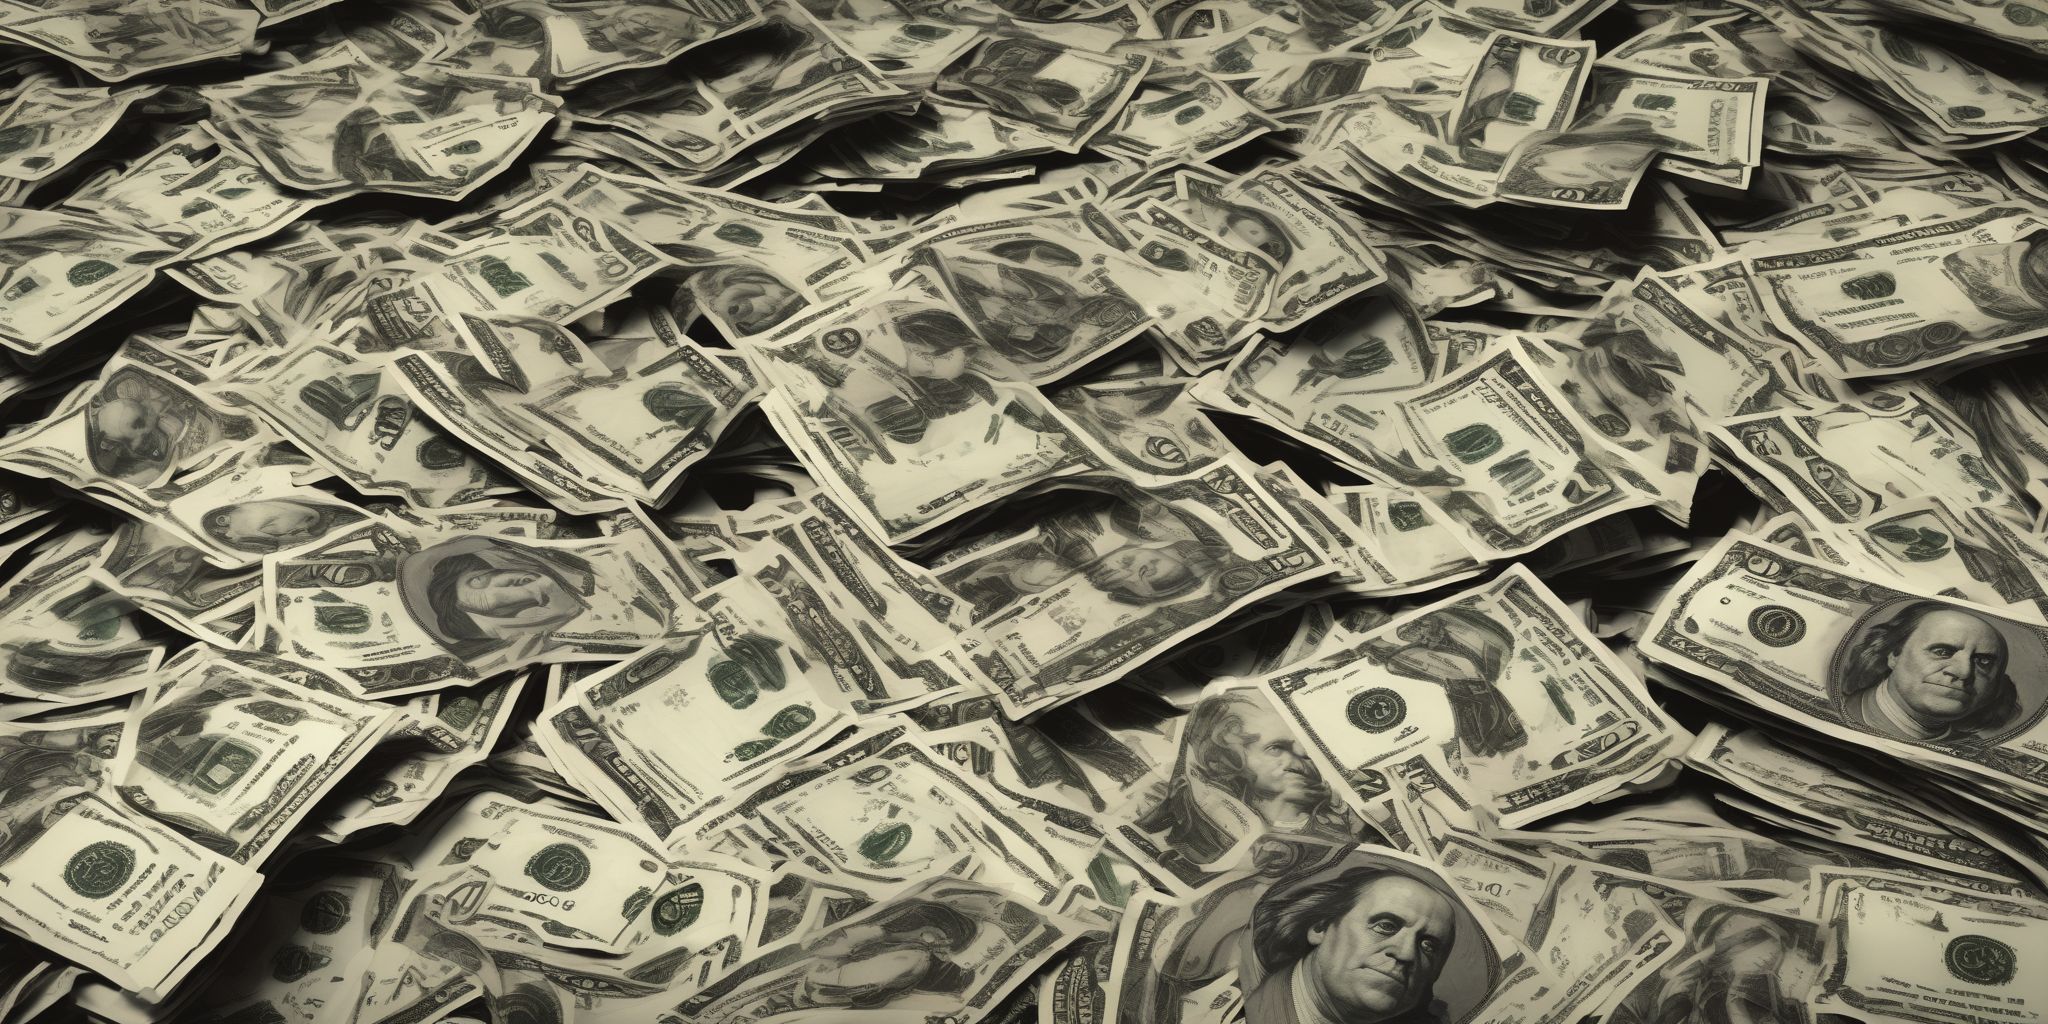 Cash  in realistic, photographic style